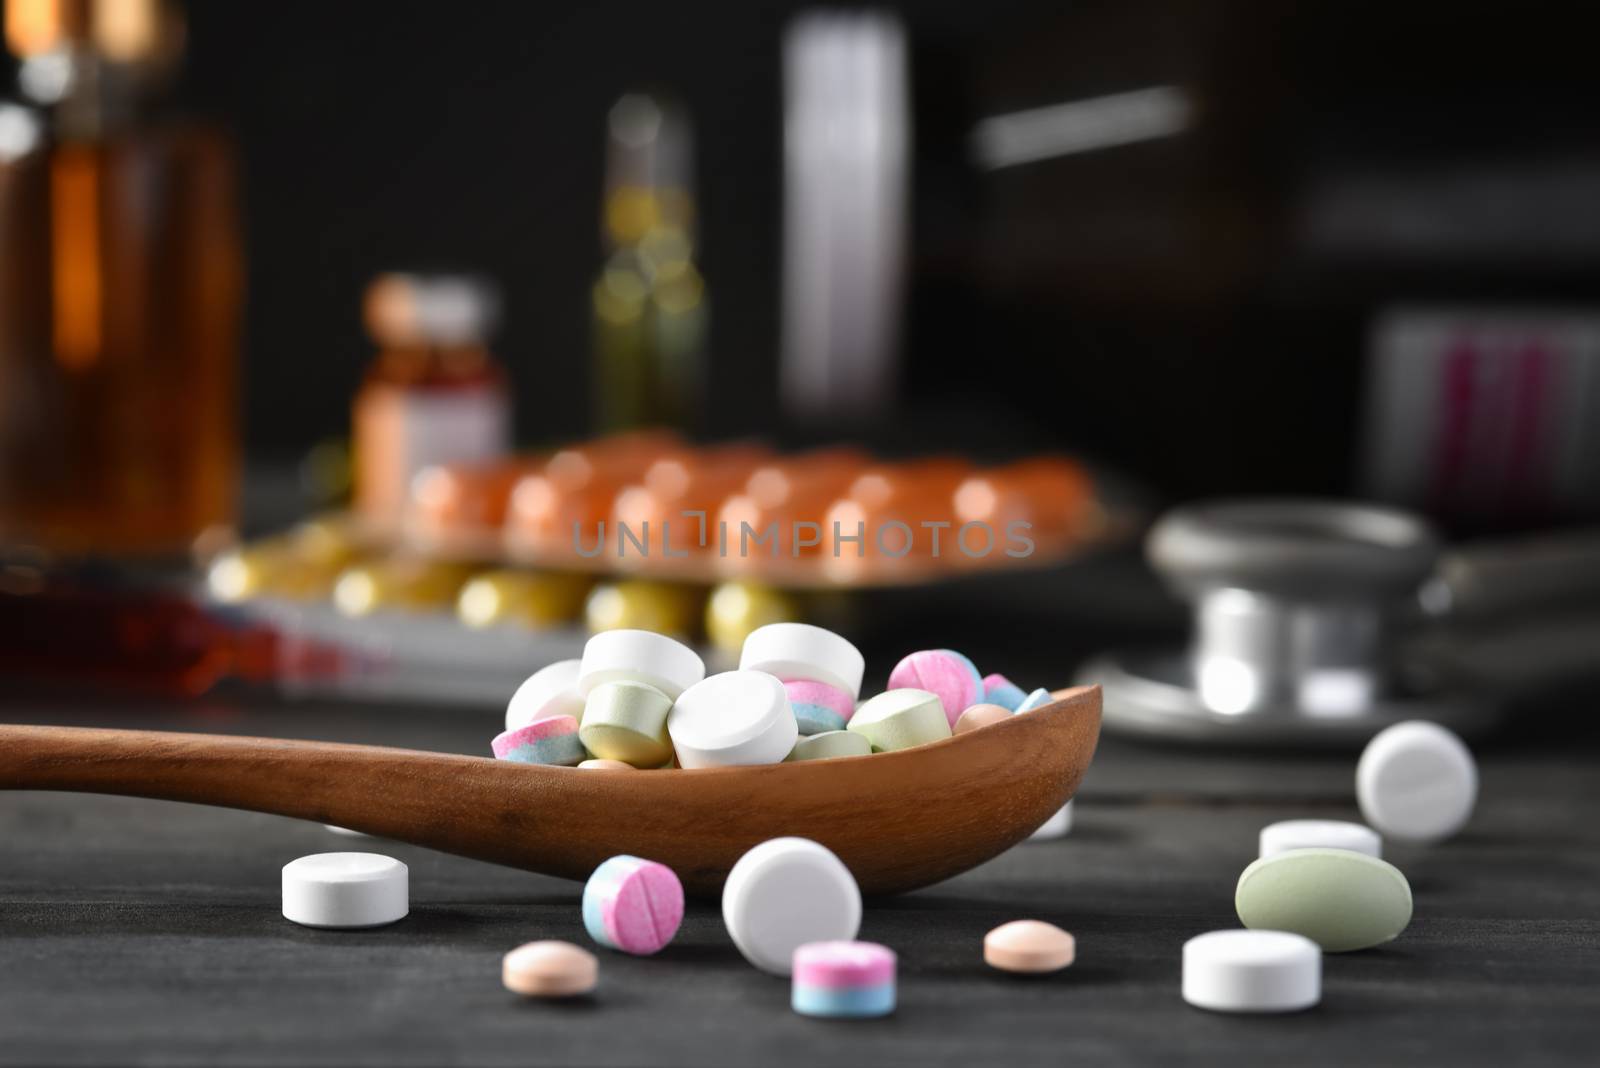 Assorted pharmaceutical medicine pills, tablets and capsules in wooden spoon on a black wooden background. Medicine concepts. Minimalistic abstract concept. Selected focus